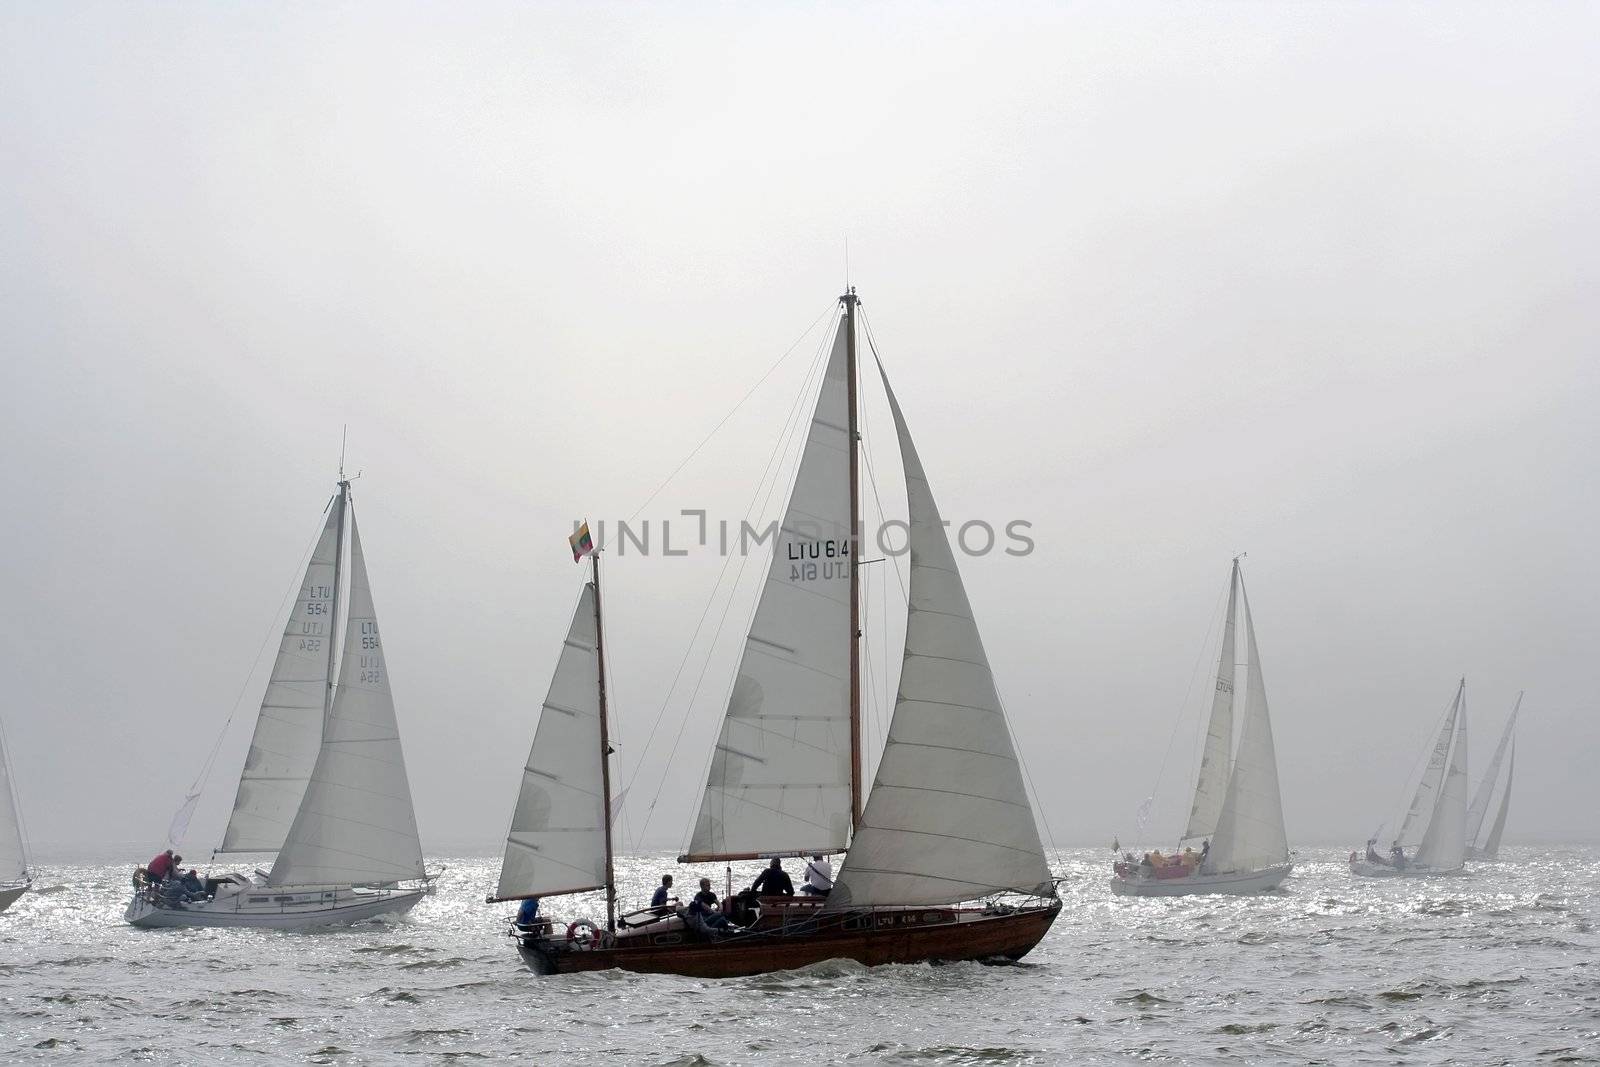 A group of yachts are racing in a regatta. Yacht silhouettes fading out in a sunny fog